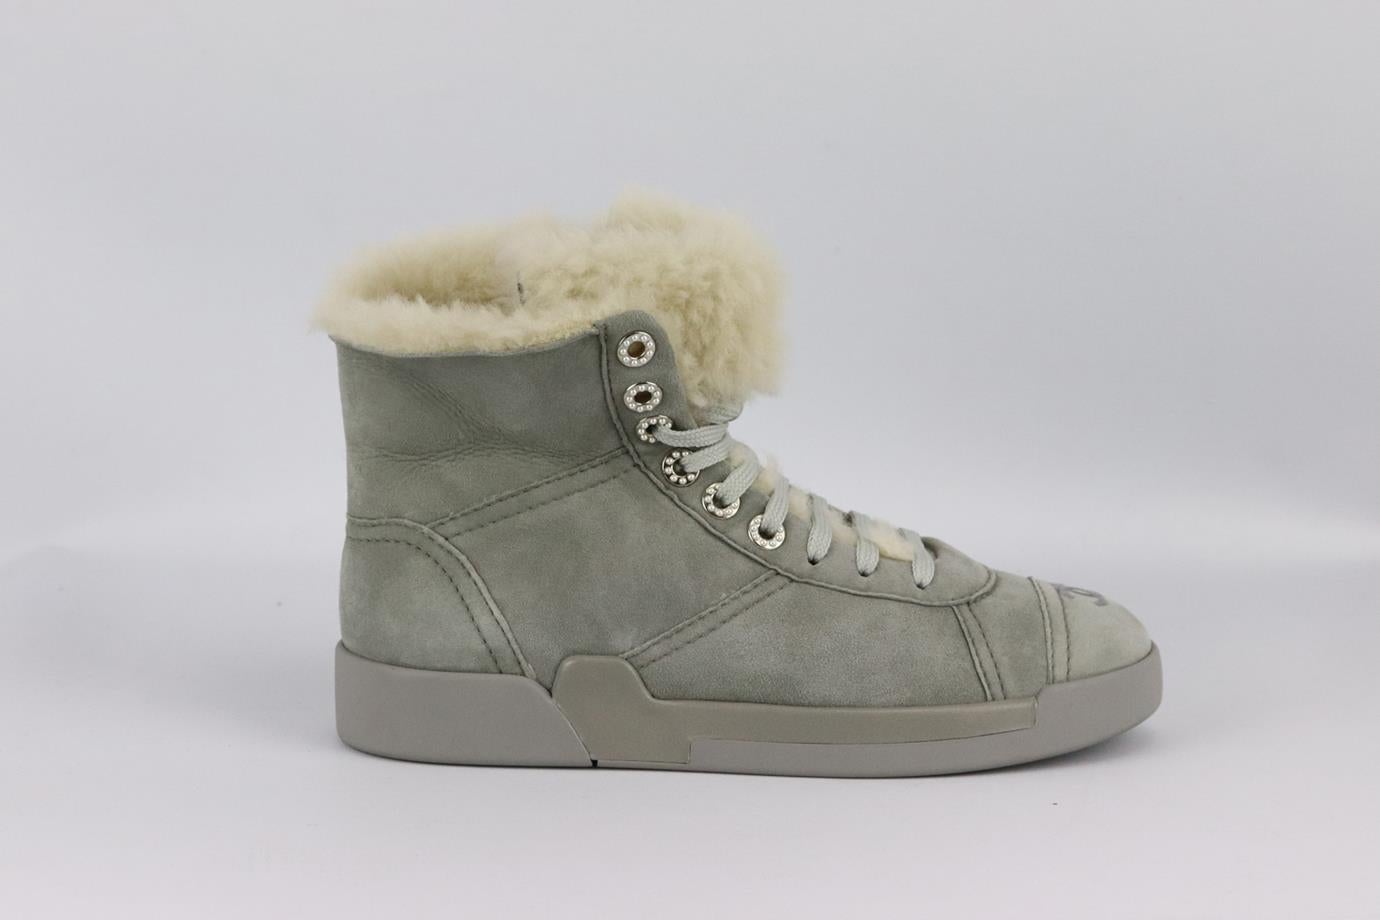 Chanel 2019 shearling lined suede sneakers. Grey. Lace up fastening at front. Does not come with box or dustbag. Size: EU 38 (UK 5, US 8). Outersole: 10.3 in. Shaft: 4.1 in. Heel: 1.2 in. New without box
